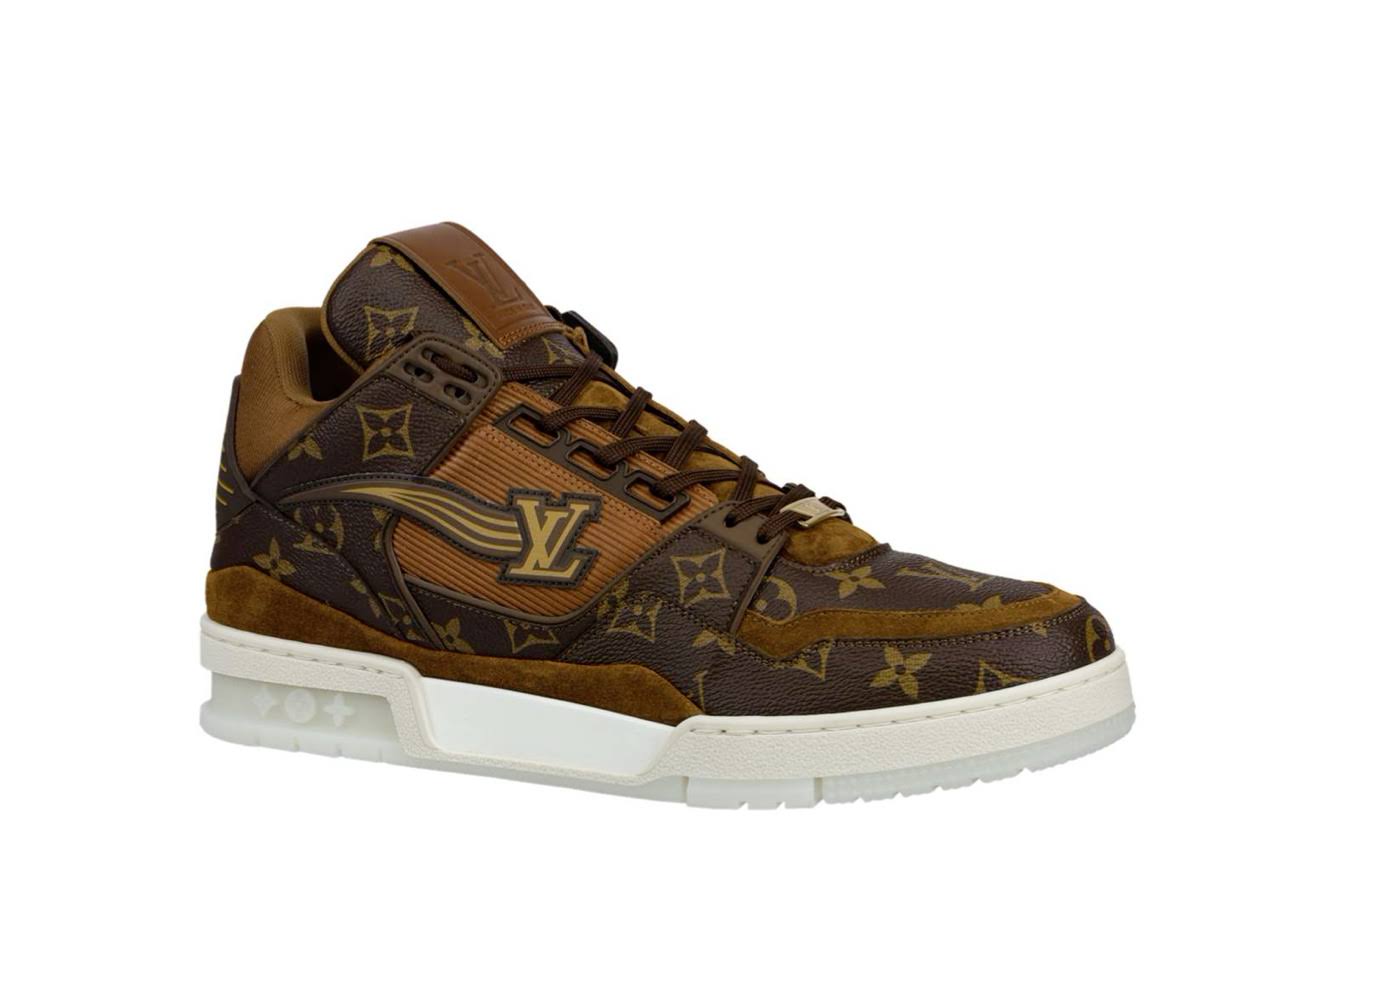 VL UOL Brown Colour With White Sole VL Logo Sneaker Shoes 139851